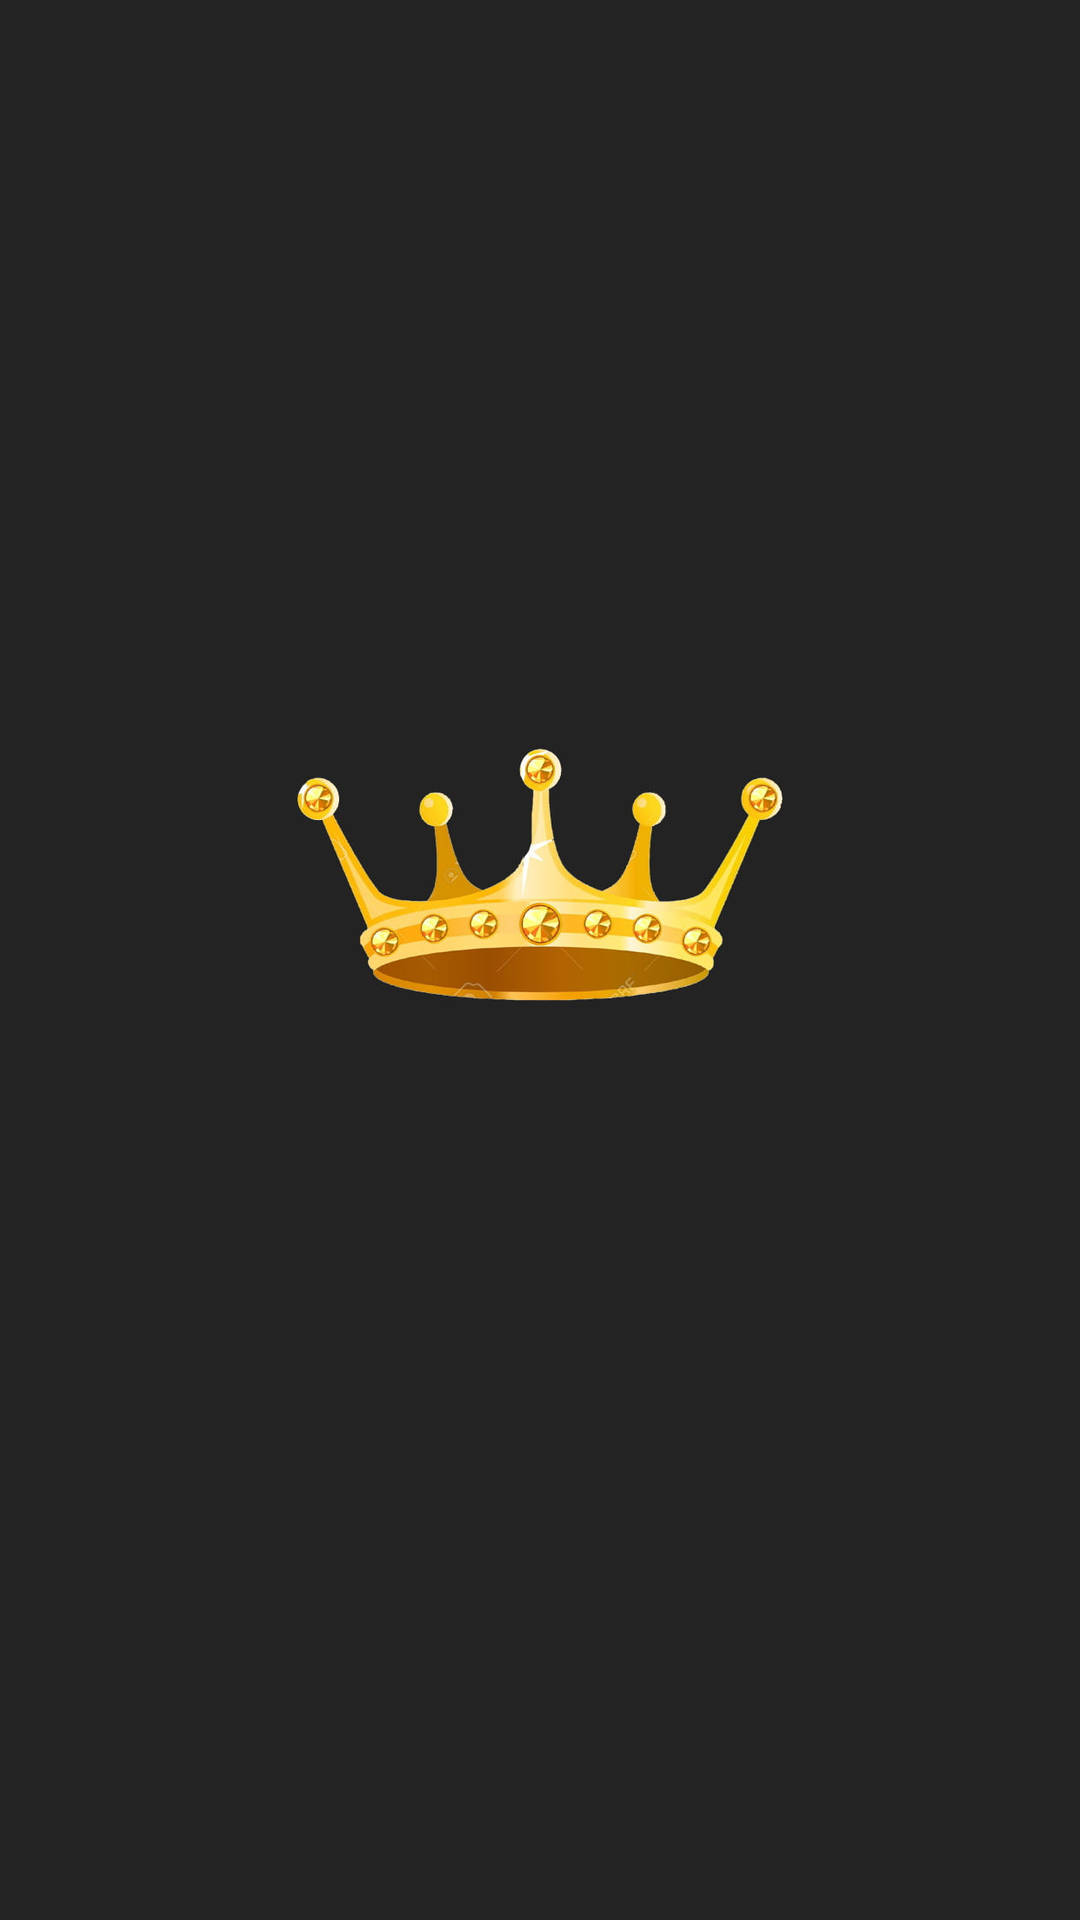 Crown With Long Tips Black Queen Background